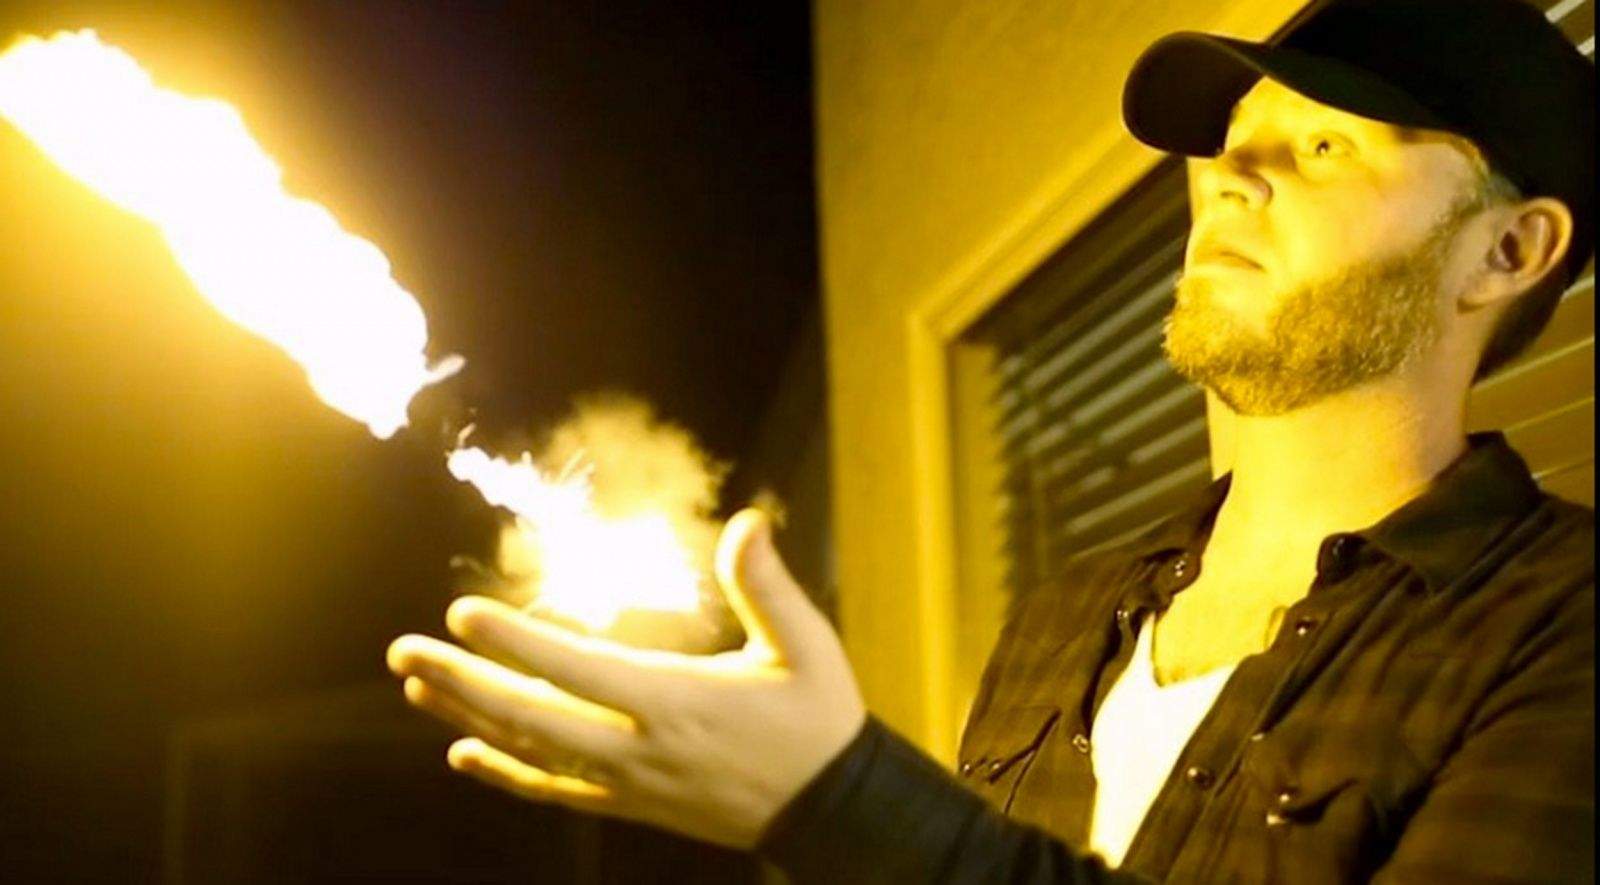 The PYRO Fireshooter puts shooting fireballs in the palm of your hand. Screen grab from ellusionist.com